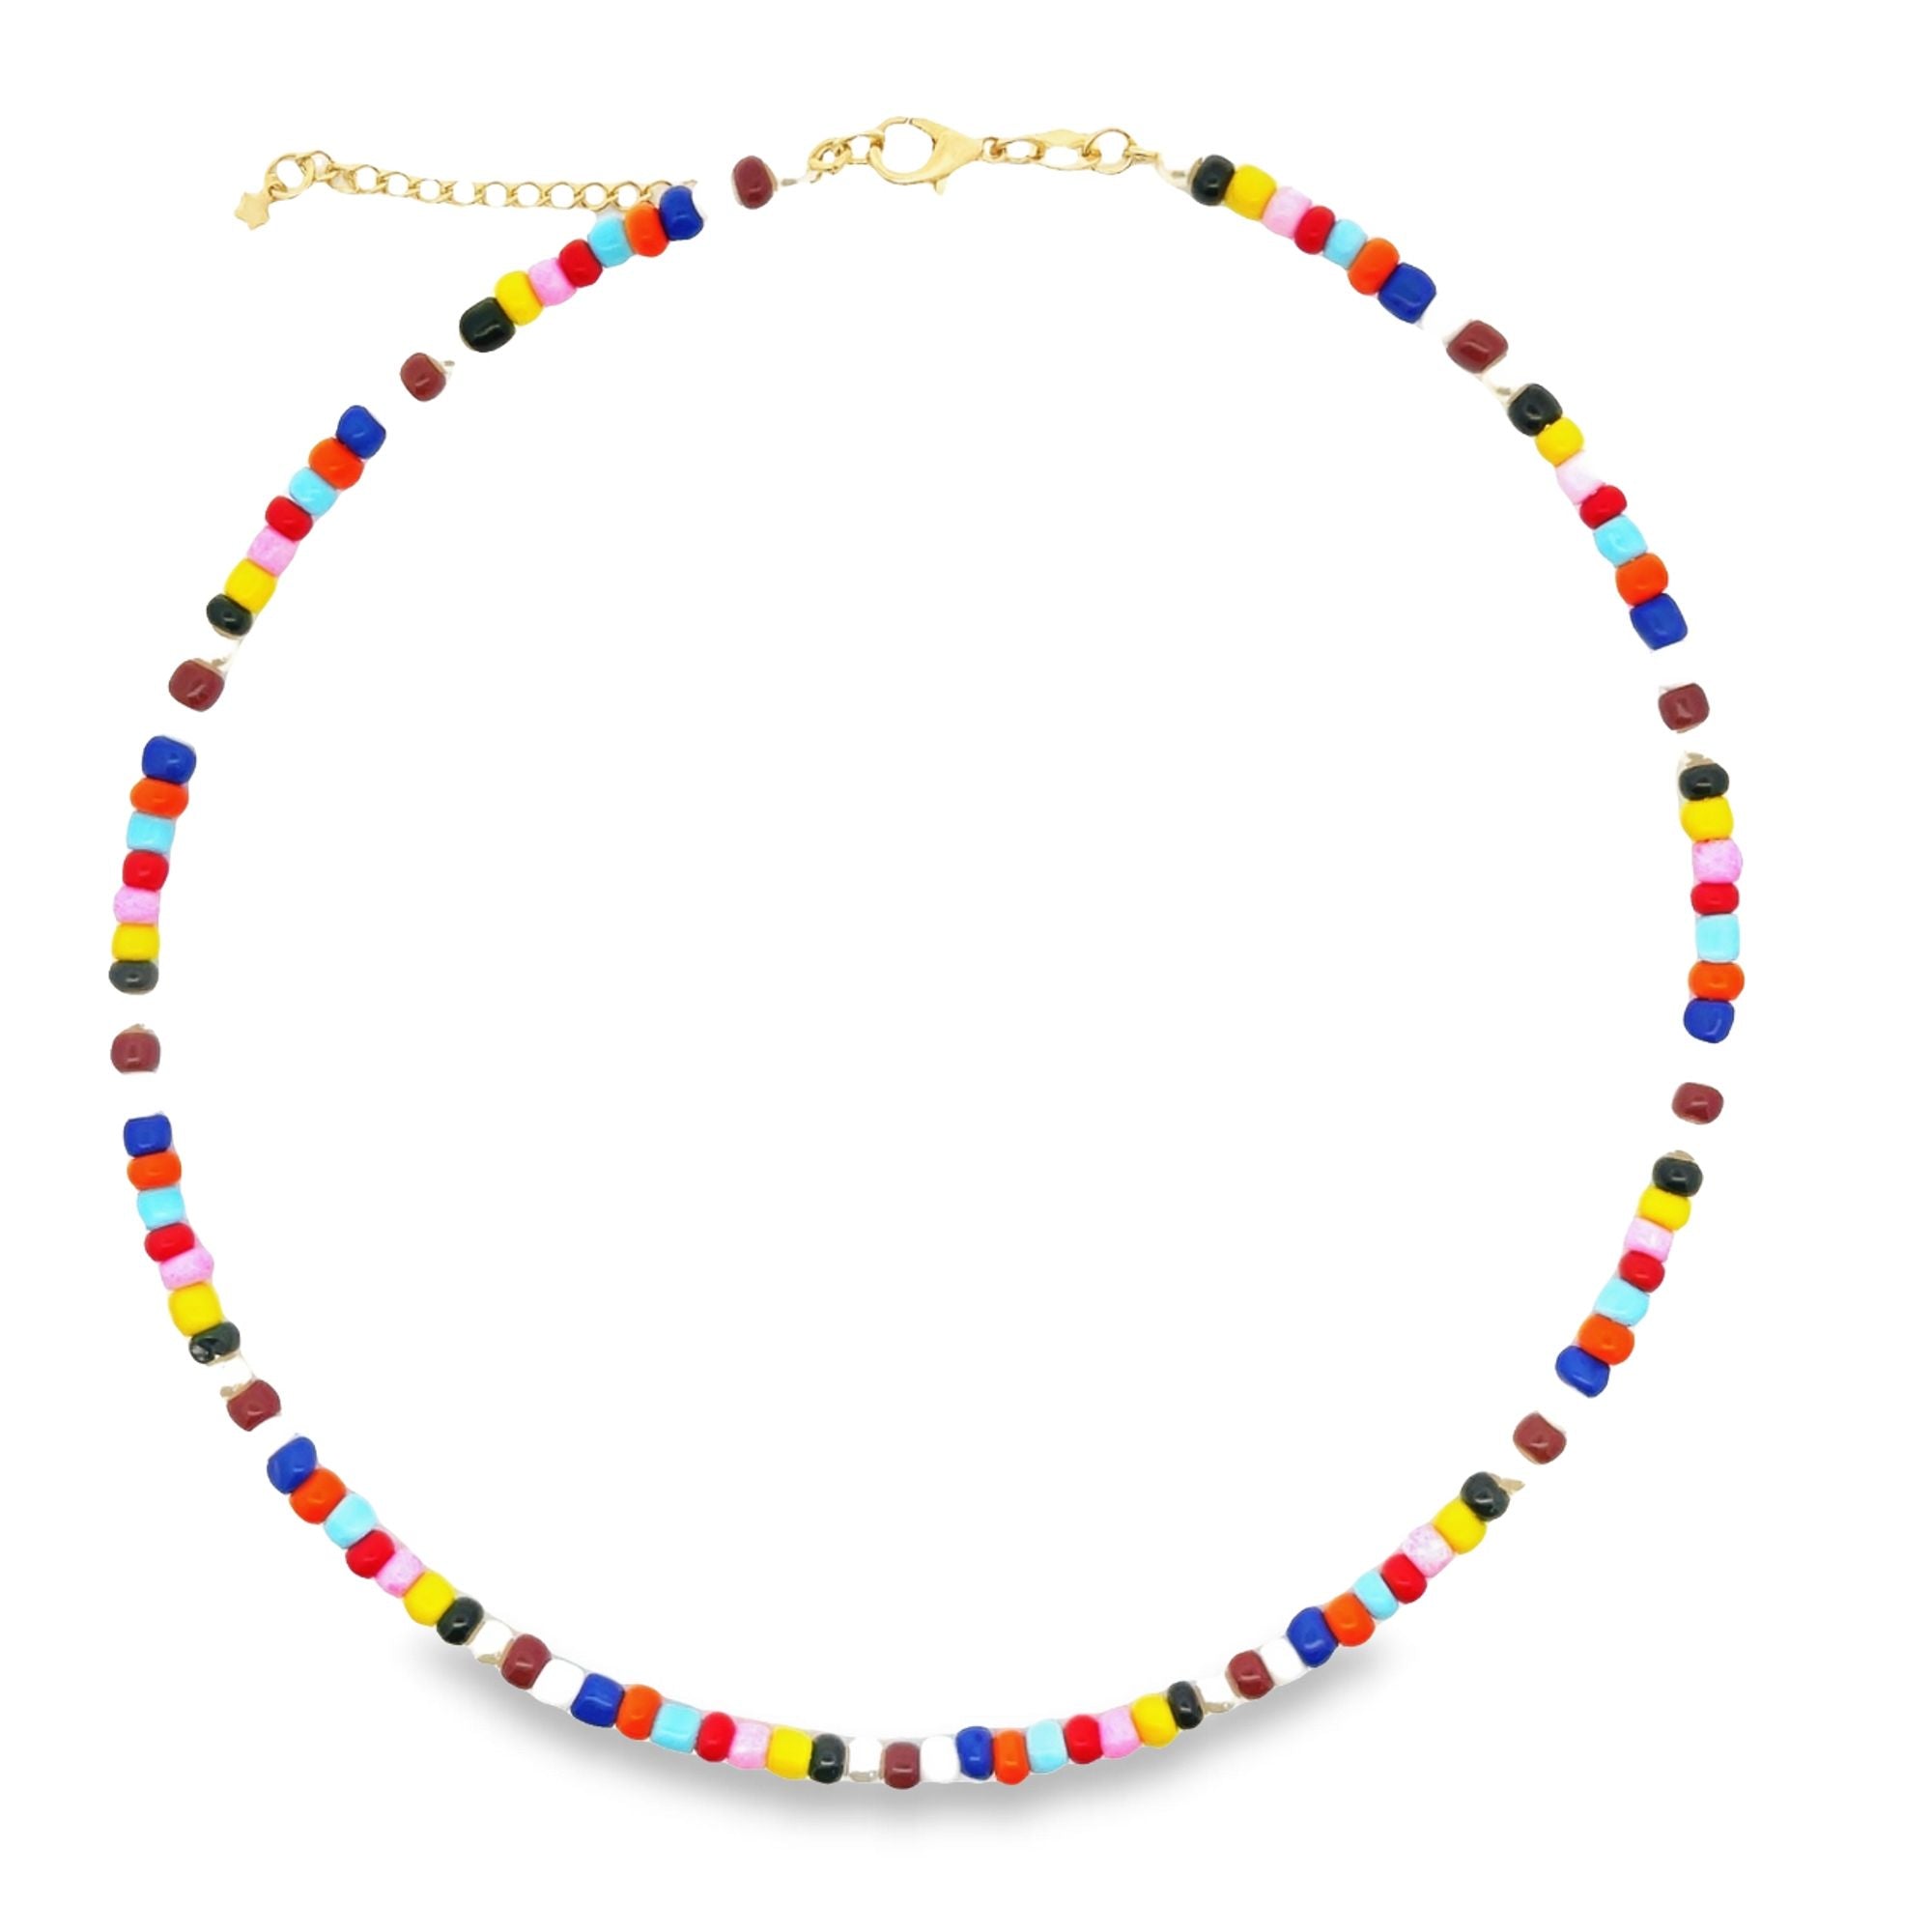 18K Gold Filled Bead Bracelet With Colorful Beads (H205)(B96A)